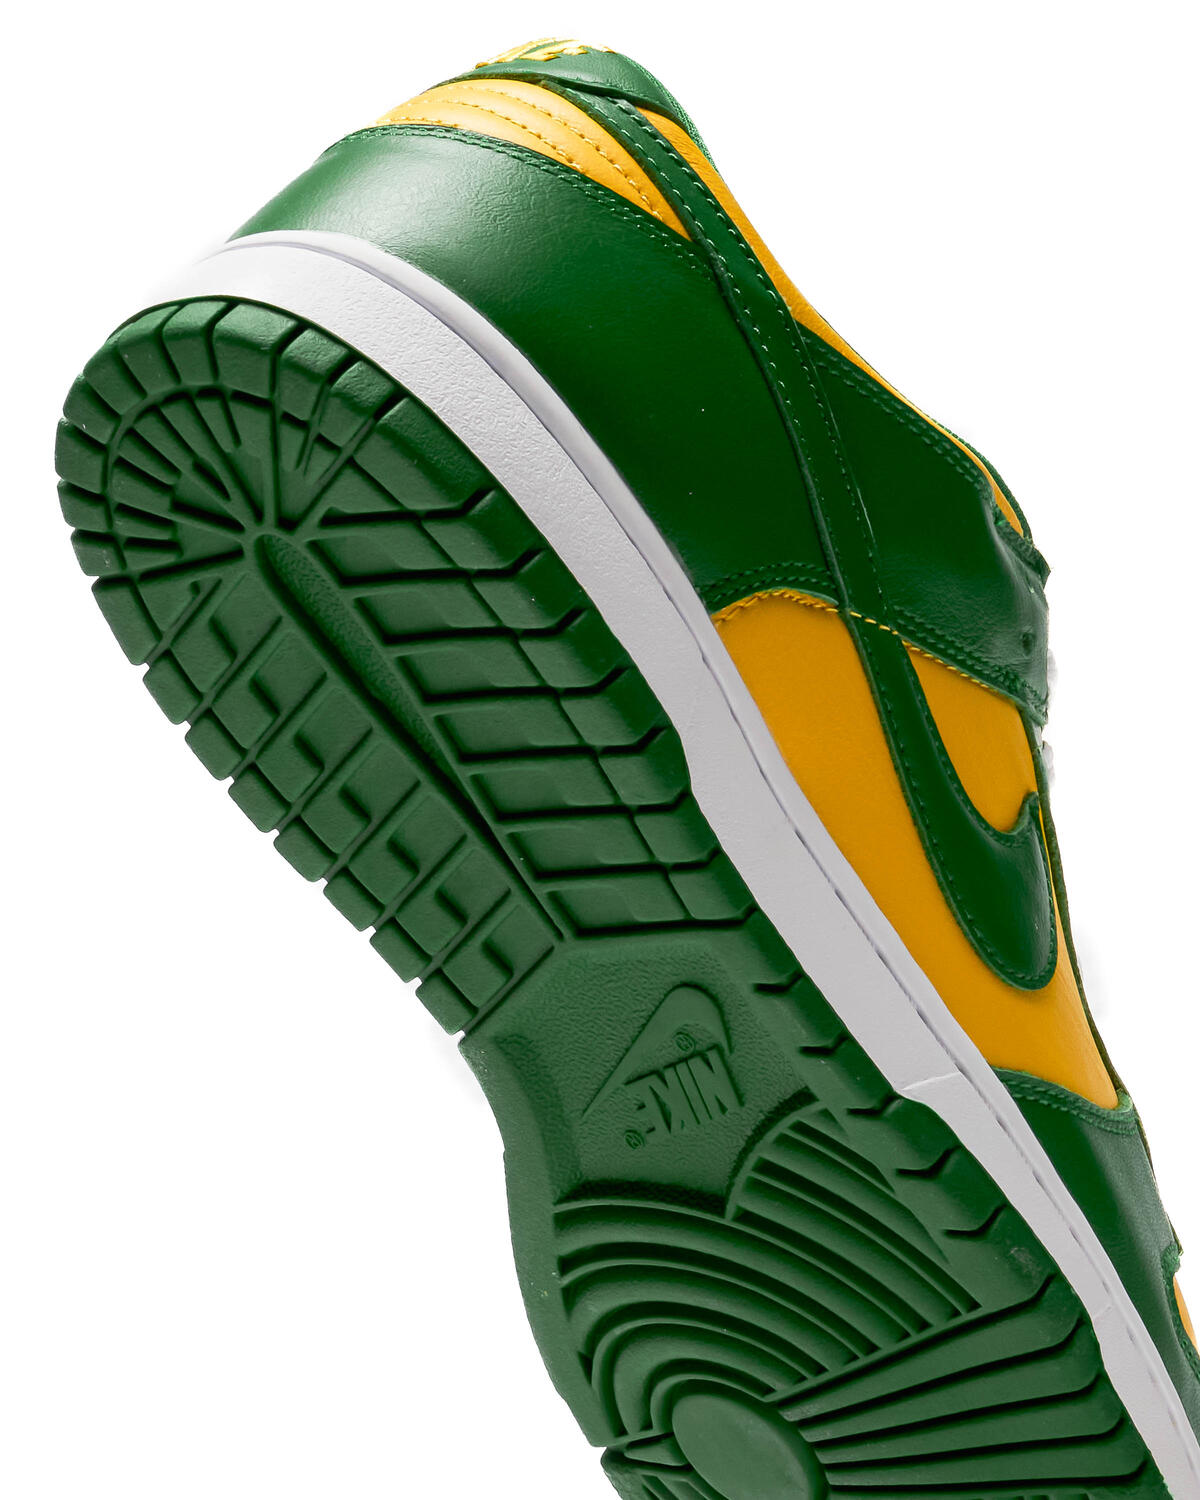 Dunk Low 'Pine Green and Varsity Maize' (CU1727-700) Release Date